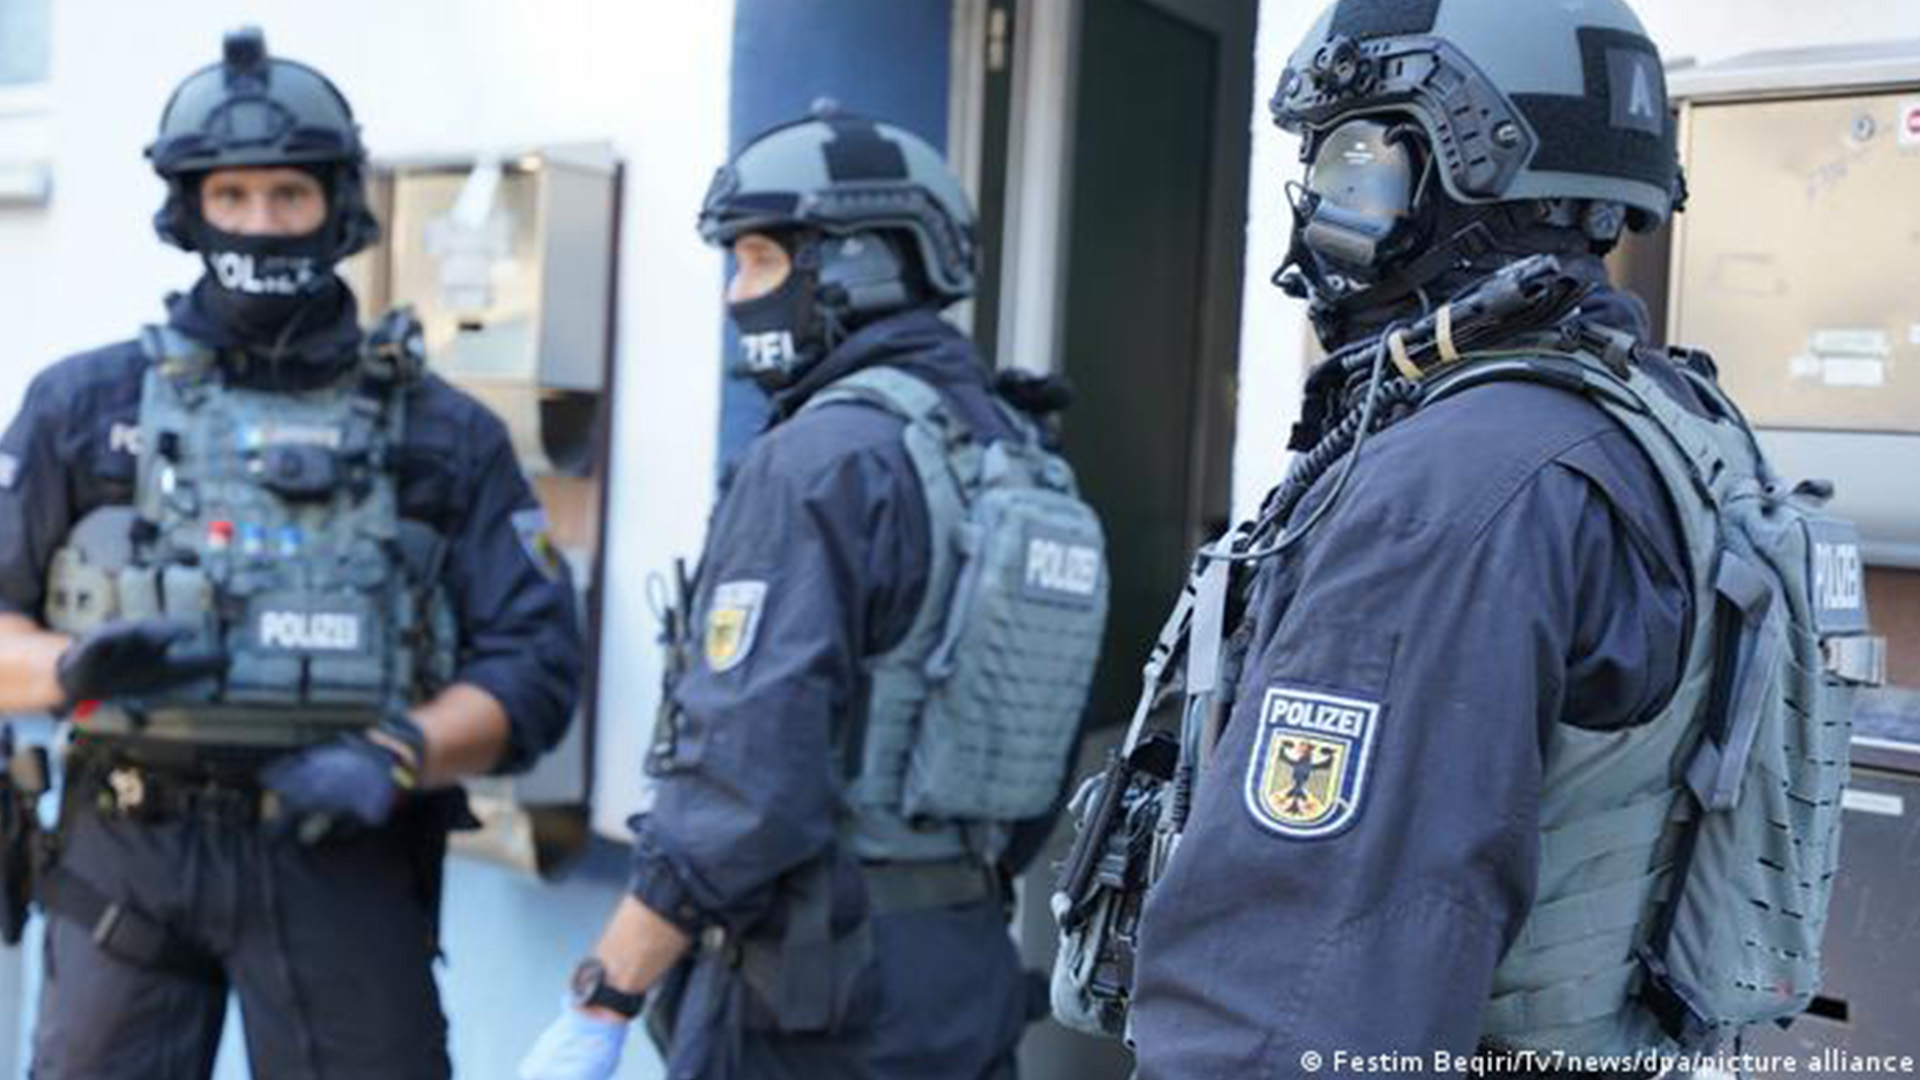  Osnabrück was a major focus of the police raids that took place in Germany - Photo Credit: DW